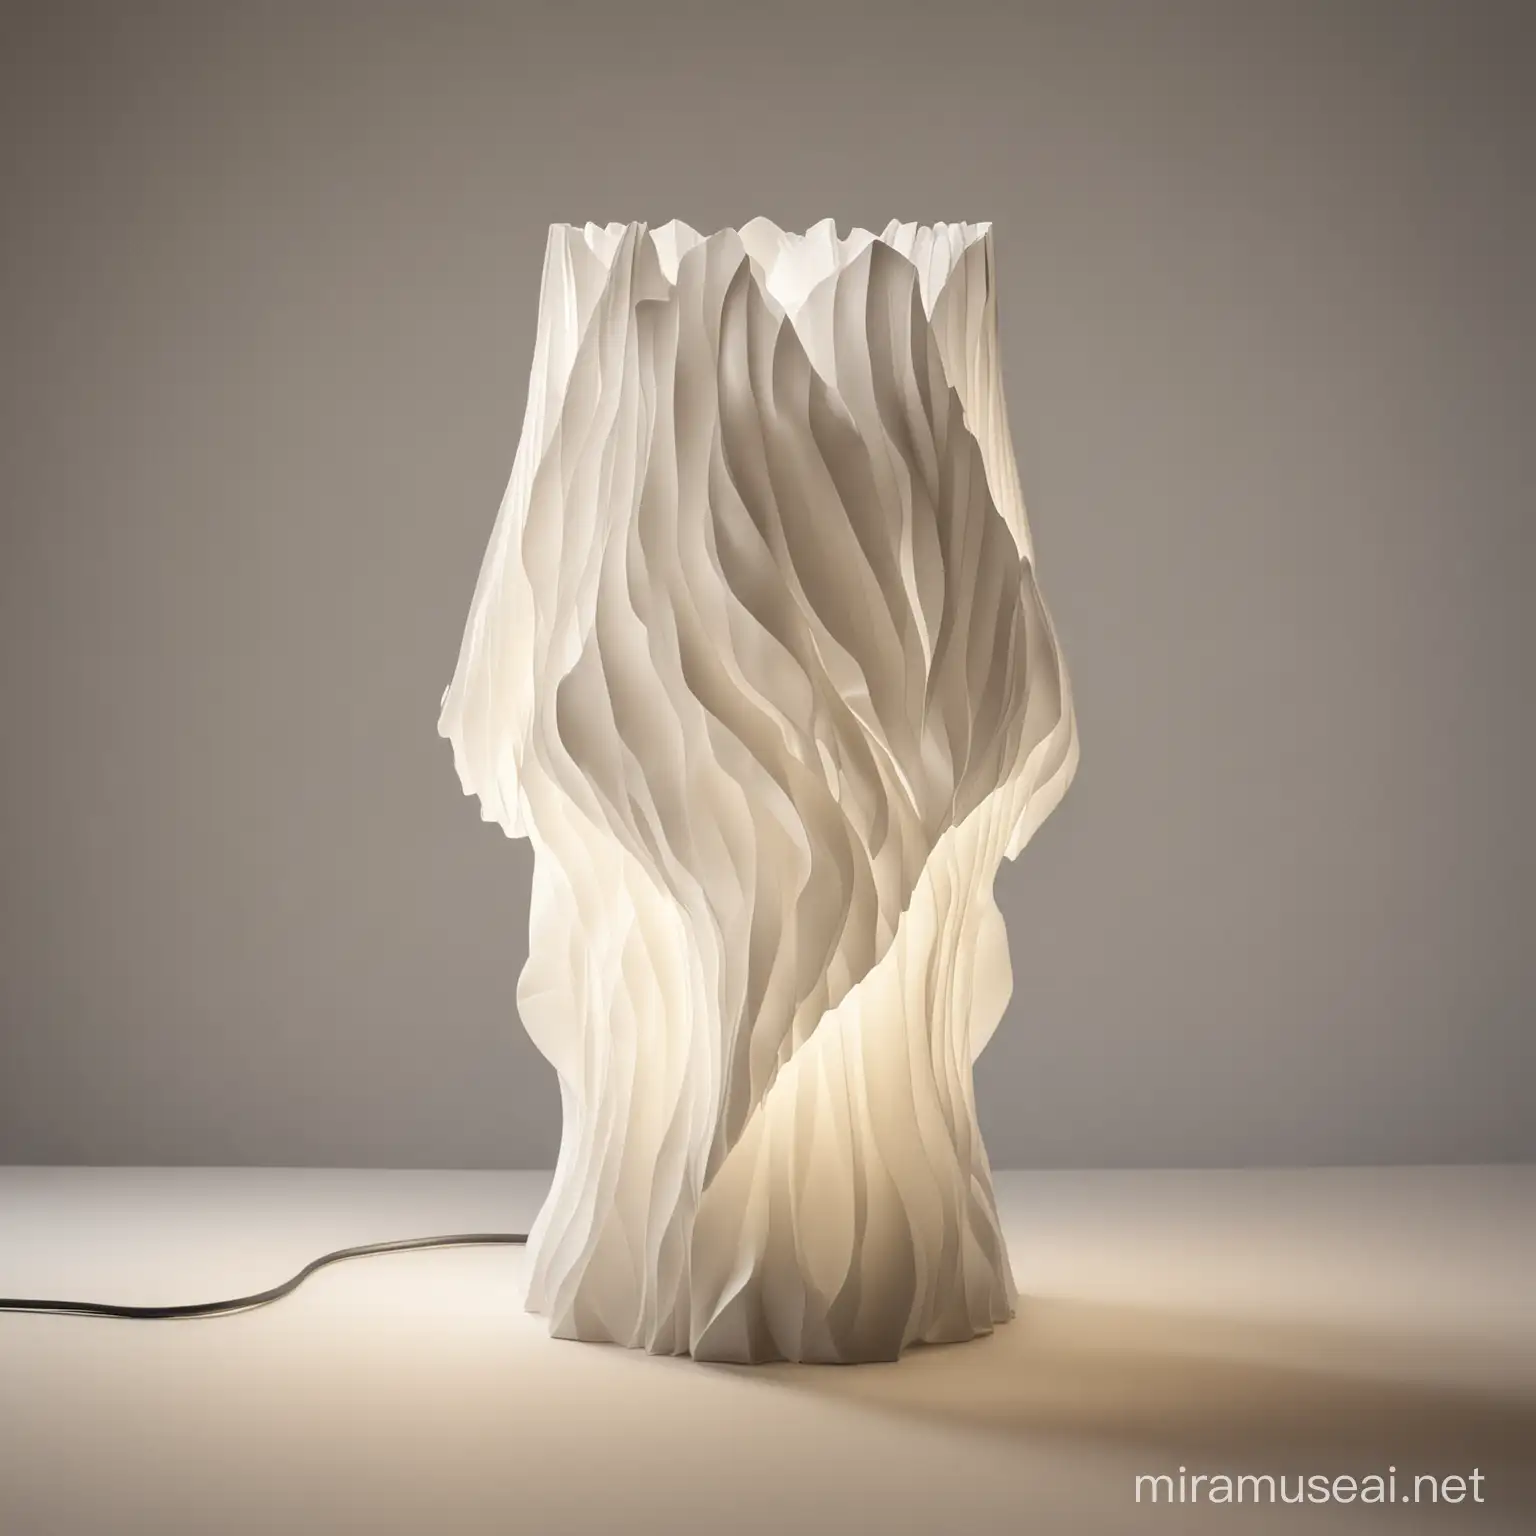 3D Printed Issey Miyake Style Lamp with Cinematic Depth of Field